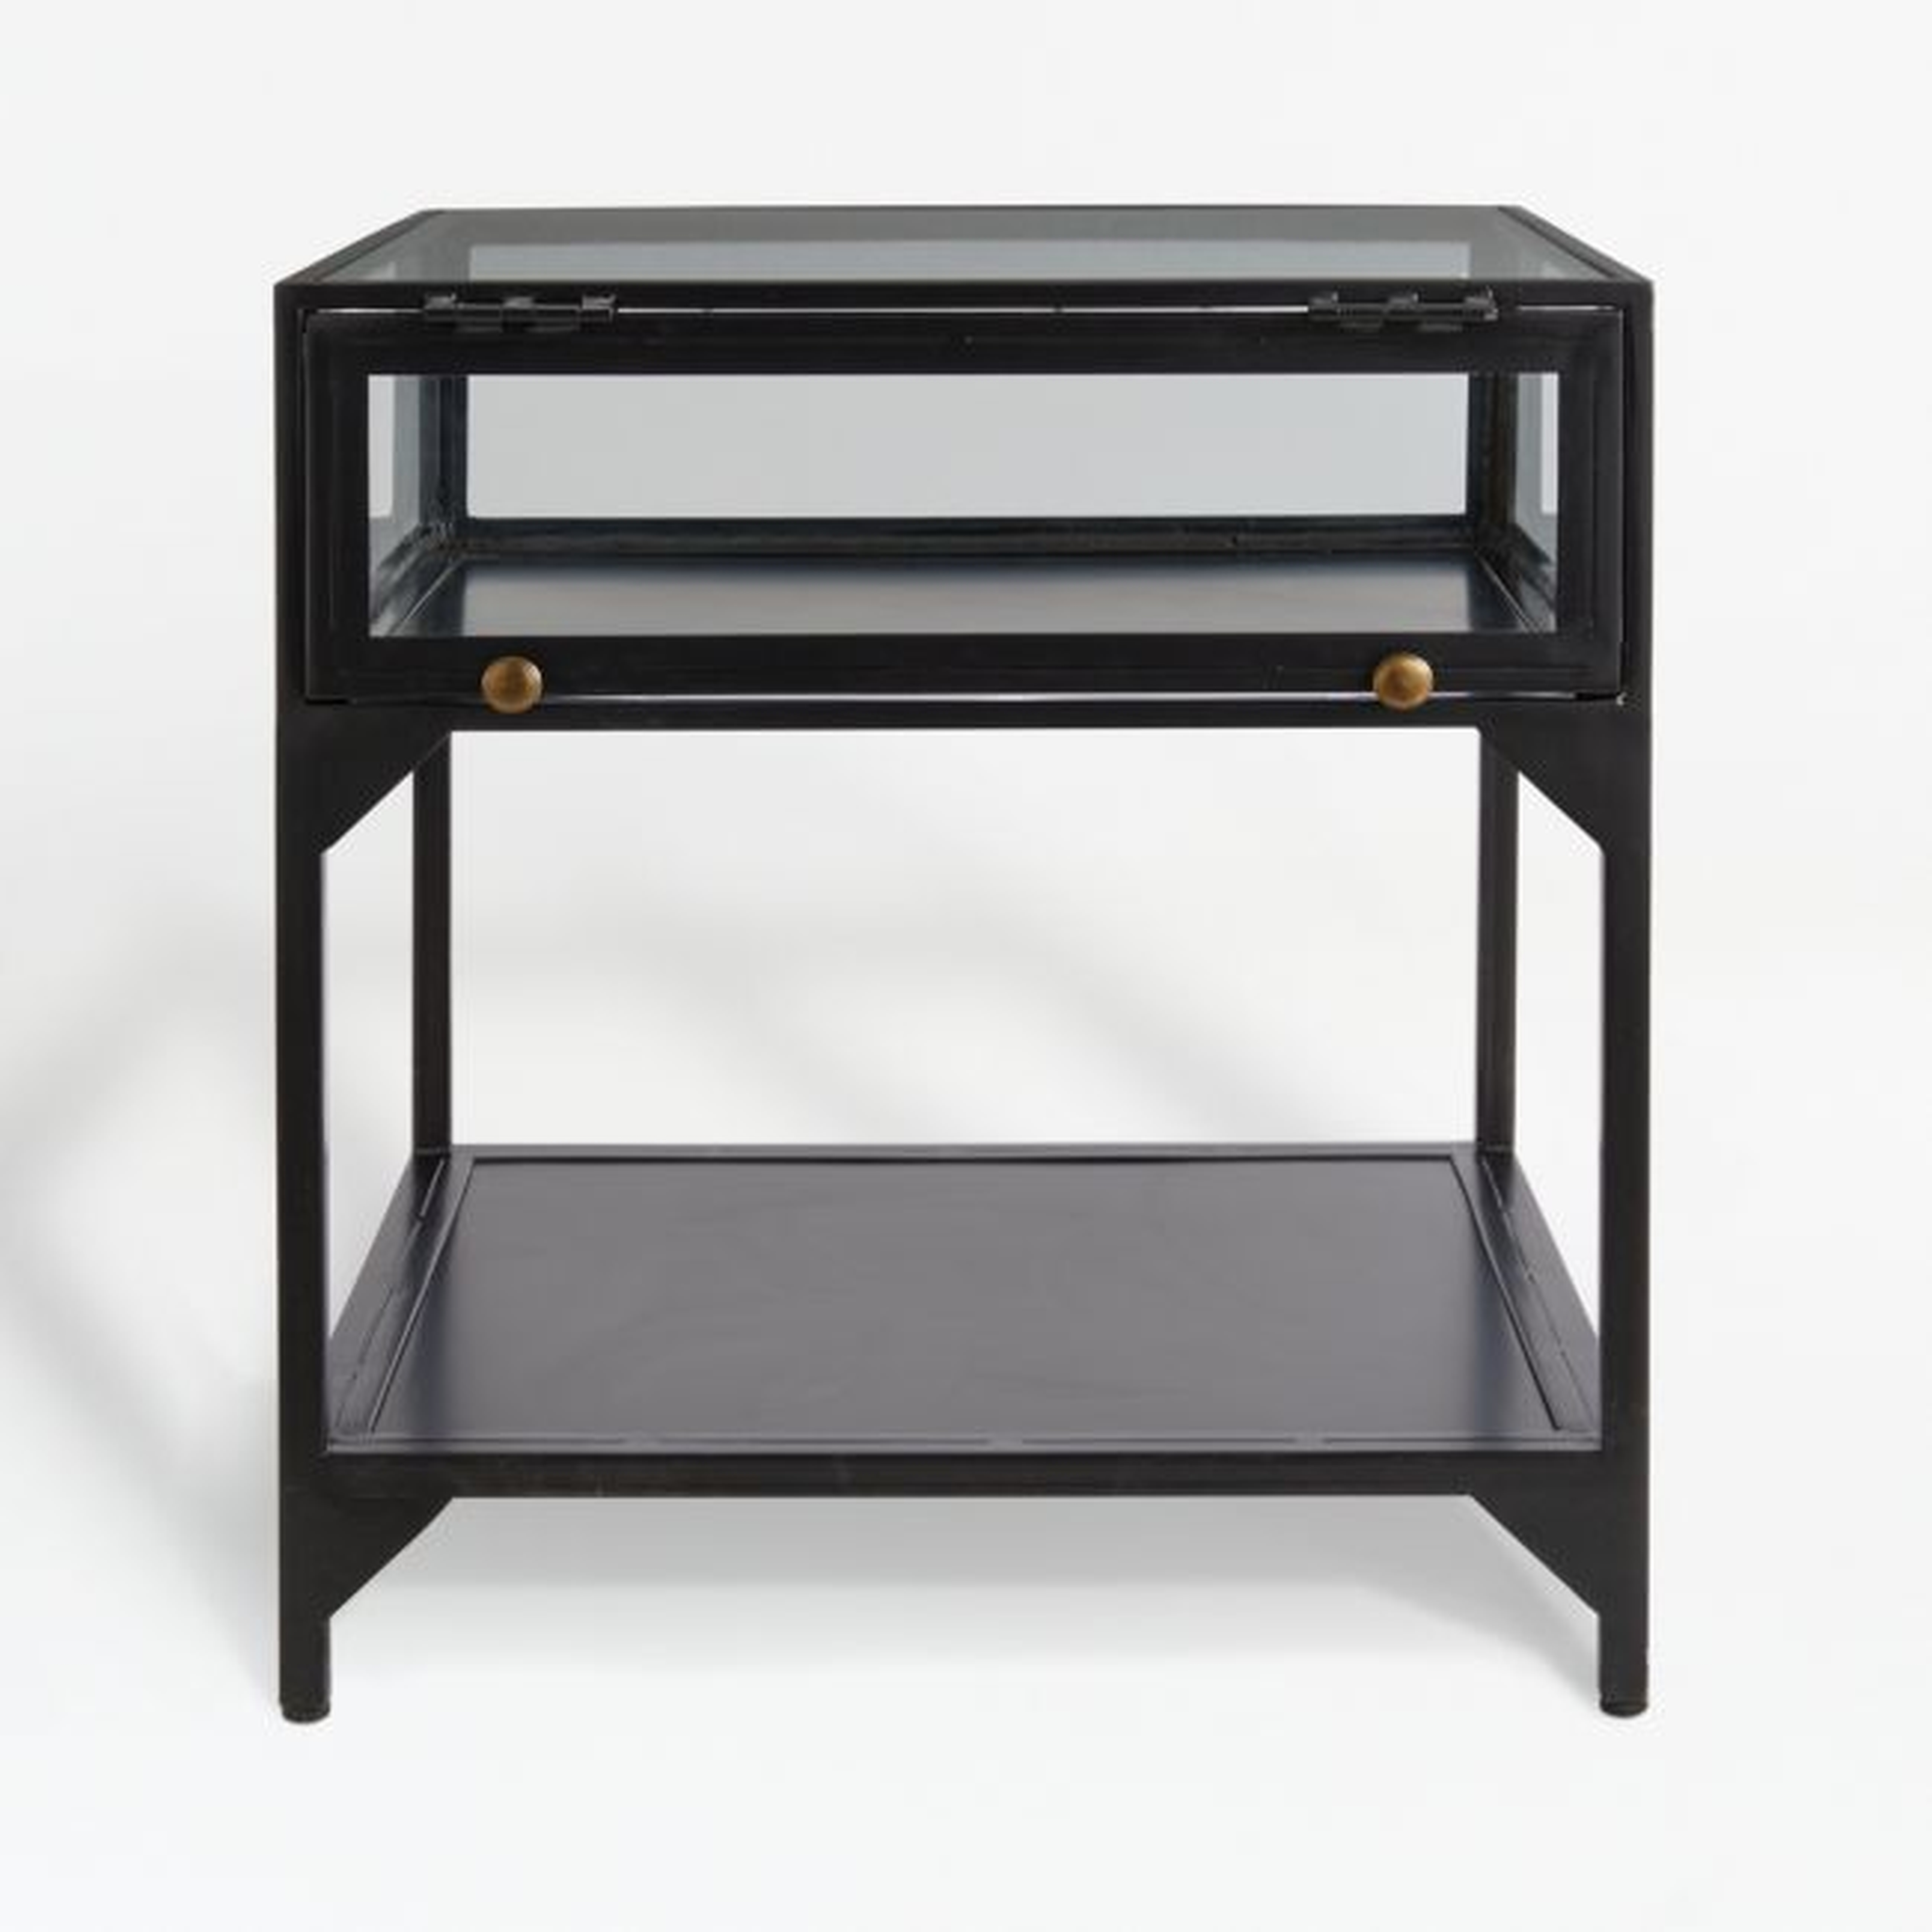 Ventana Black Glass Display End Table with Shelf - Crate and Barrel